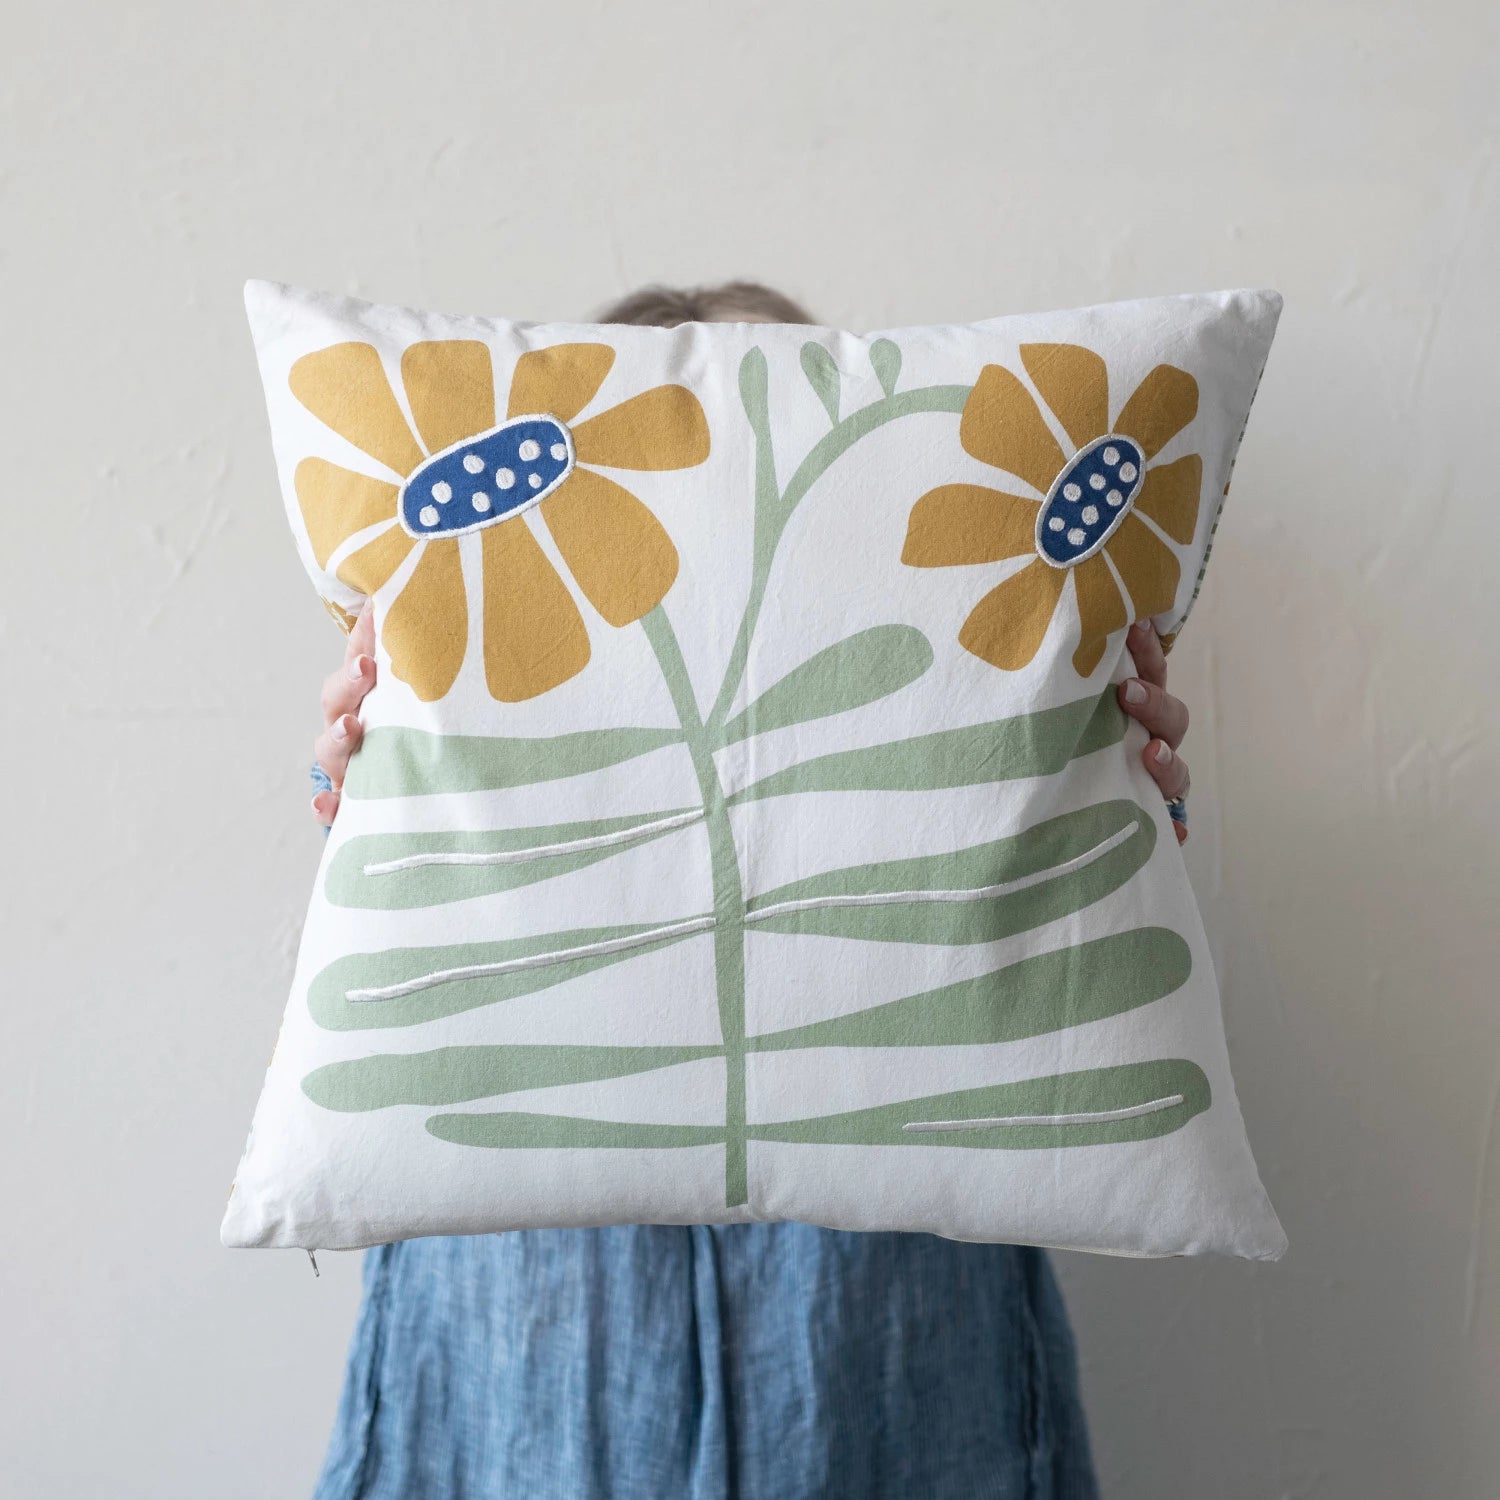 person holding a pillow up in front of their face. pillow is off-white with 2 yellow flowers near the top on green stems with blue centers.